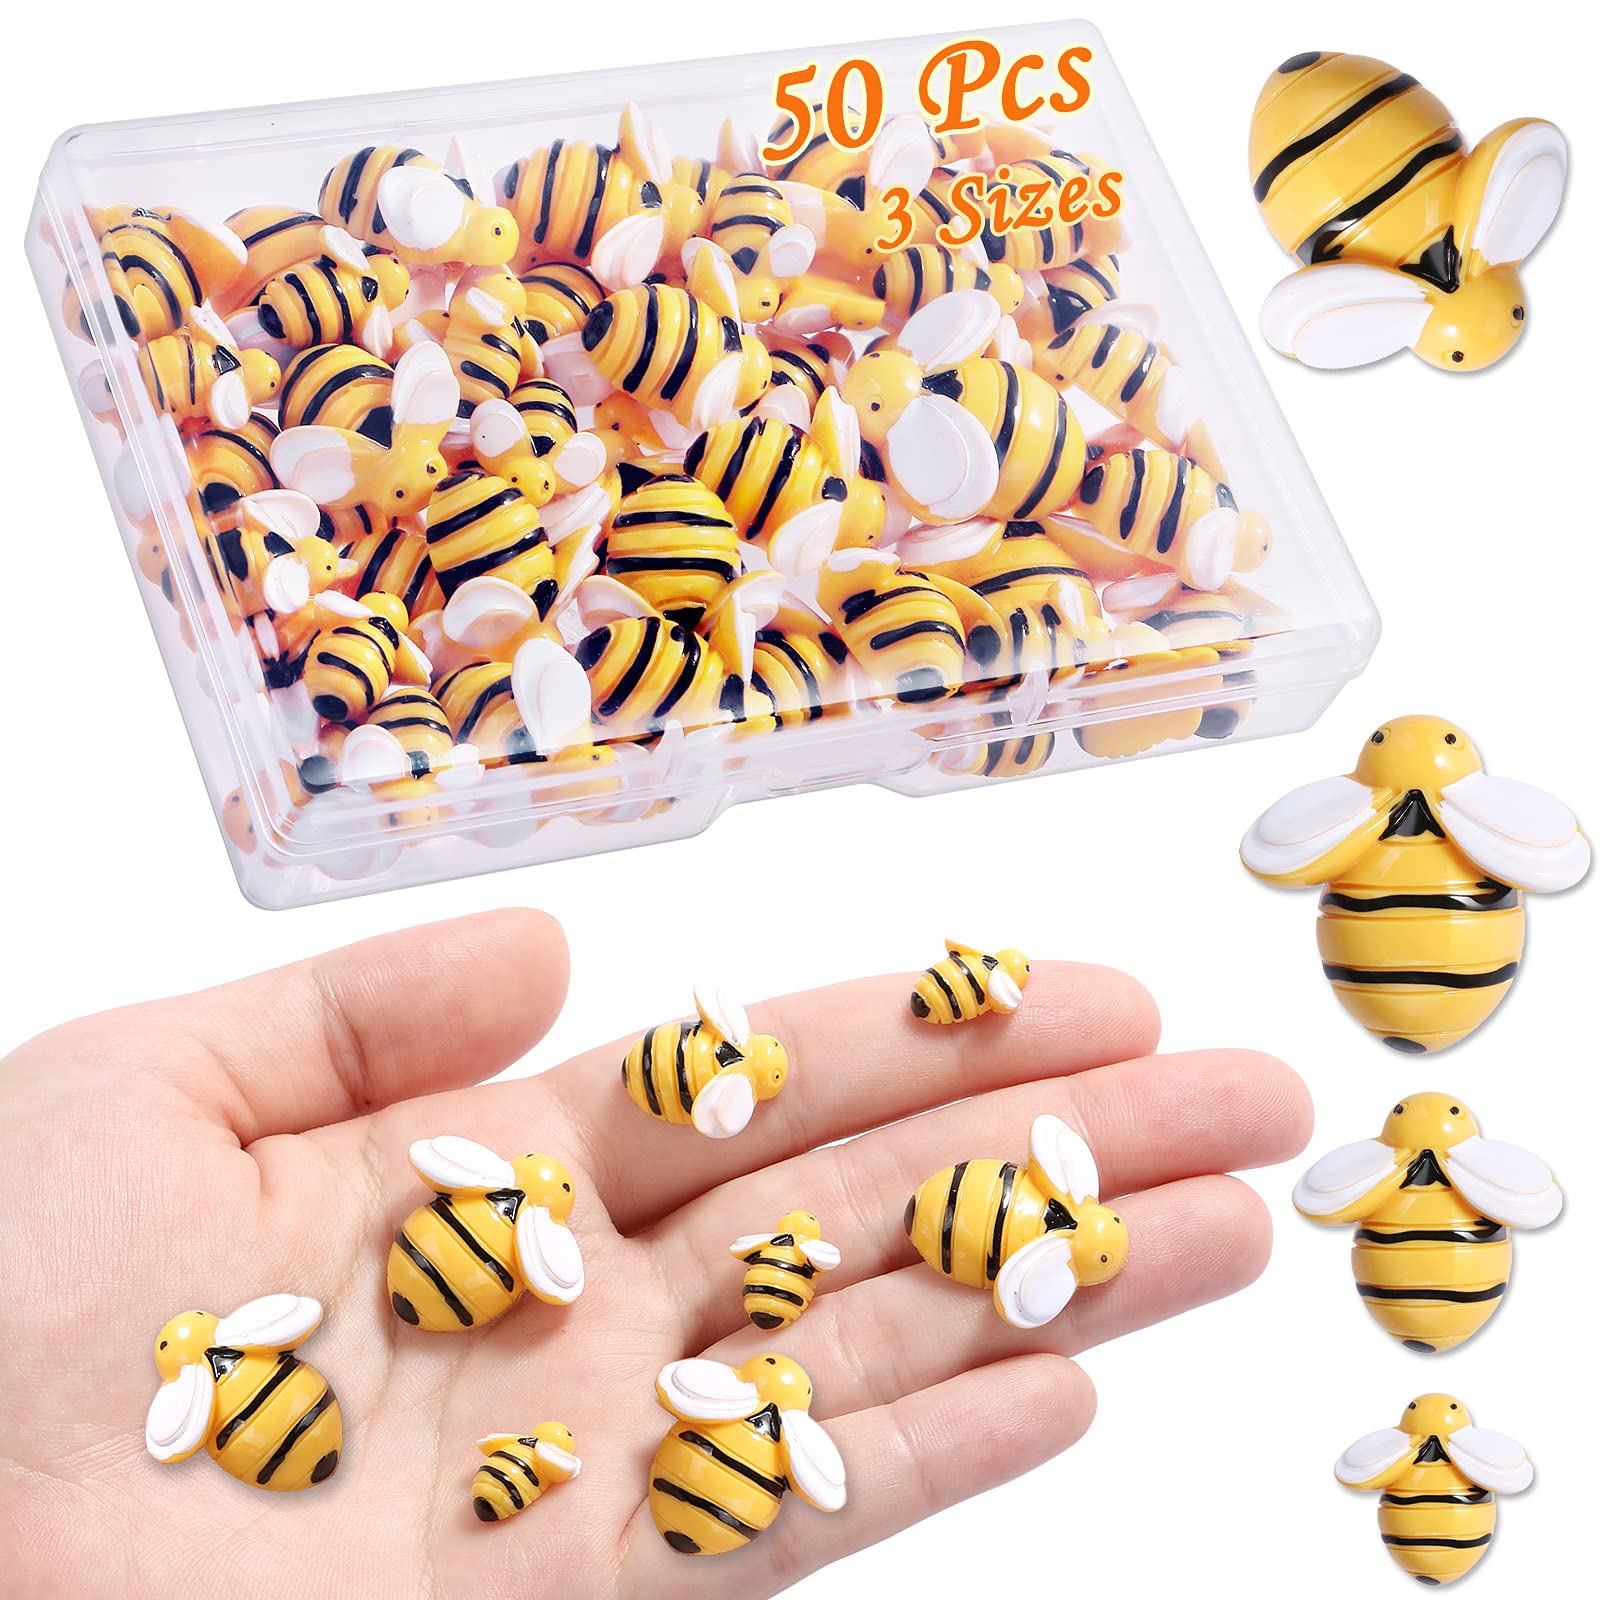 50 Adorable Bumblebee Party Ideas and Bumble Bee Party Supplies! 